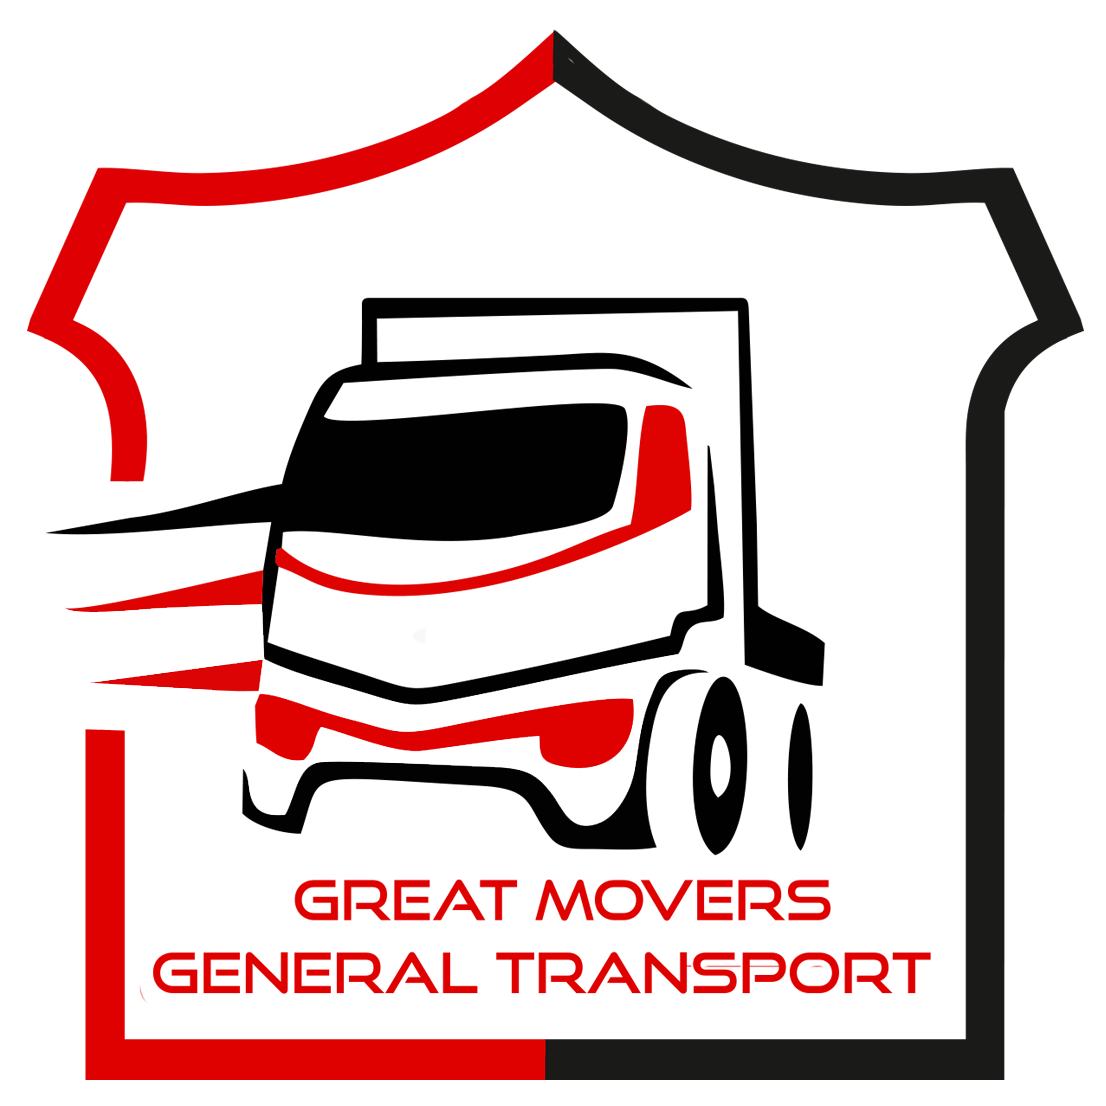 Great Mover General Transport